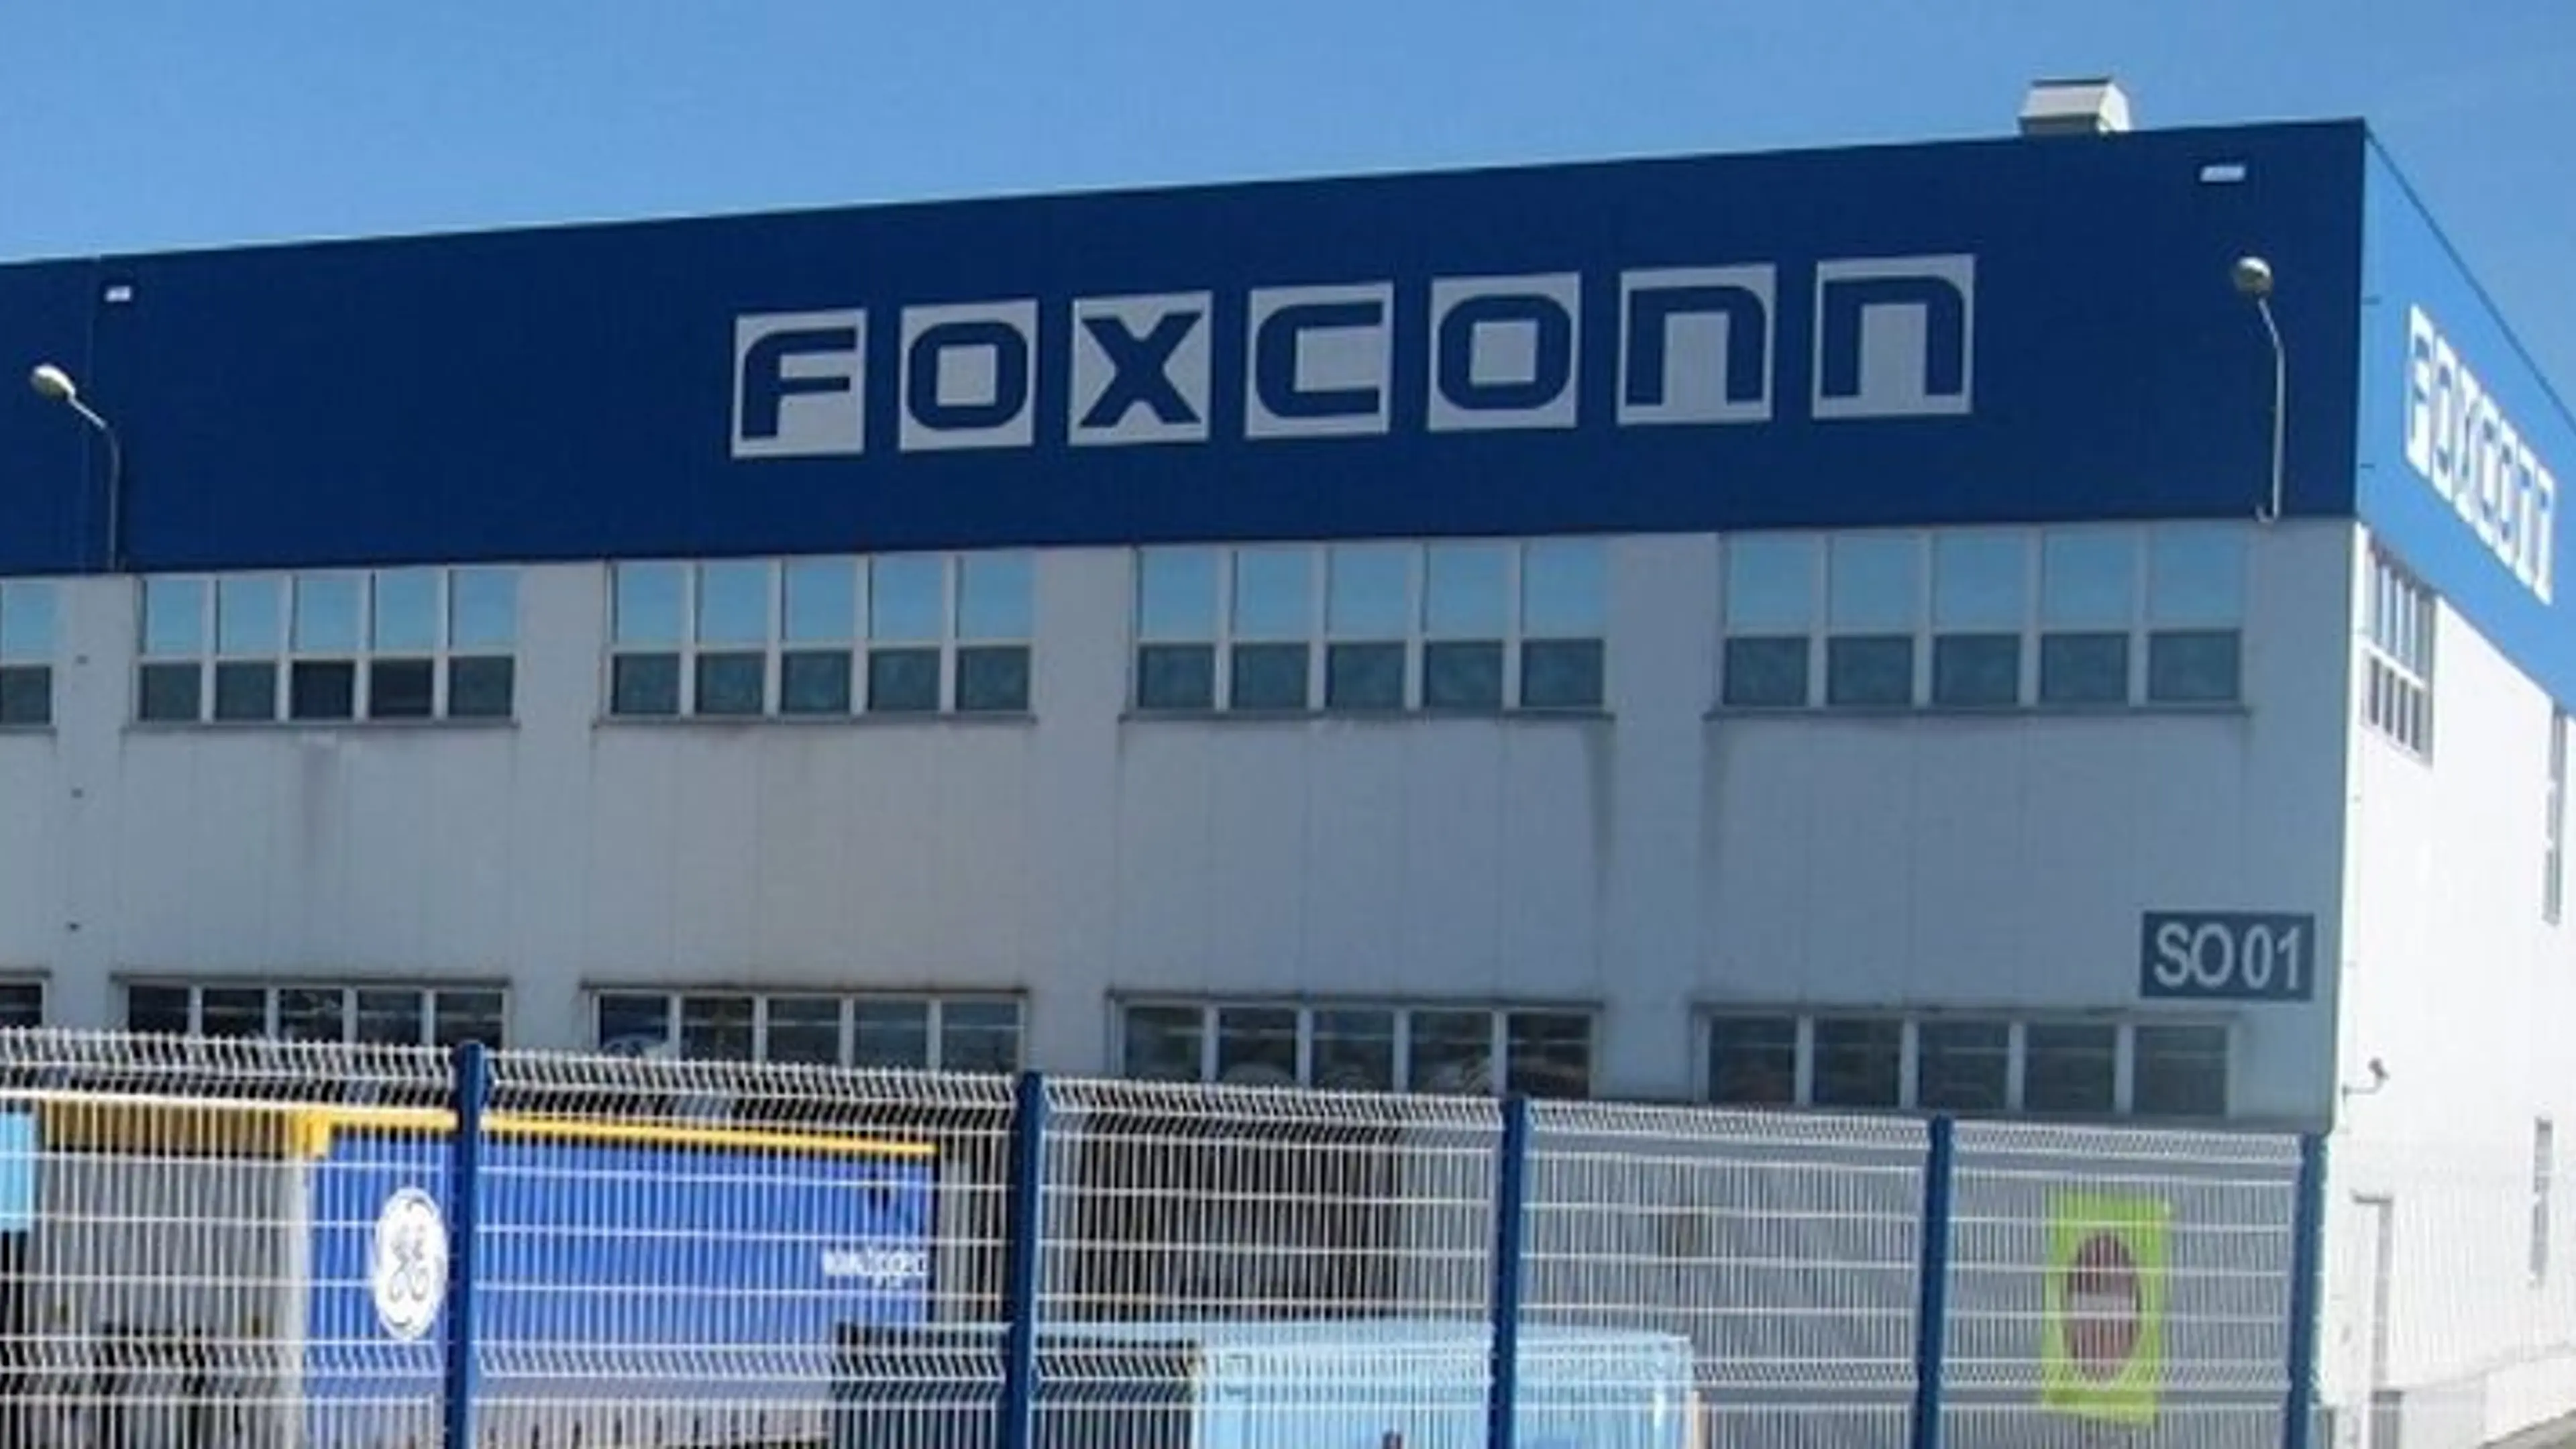 NHRC issues notices to Centre, TN government on Foxconn’s alleged gender discrimination 